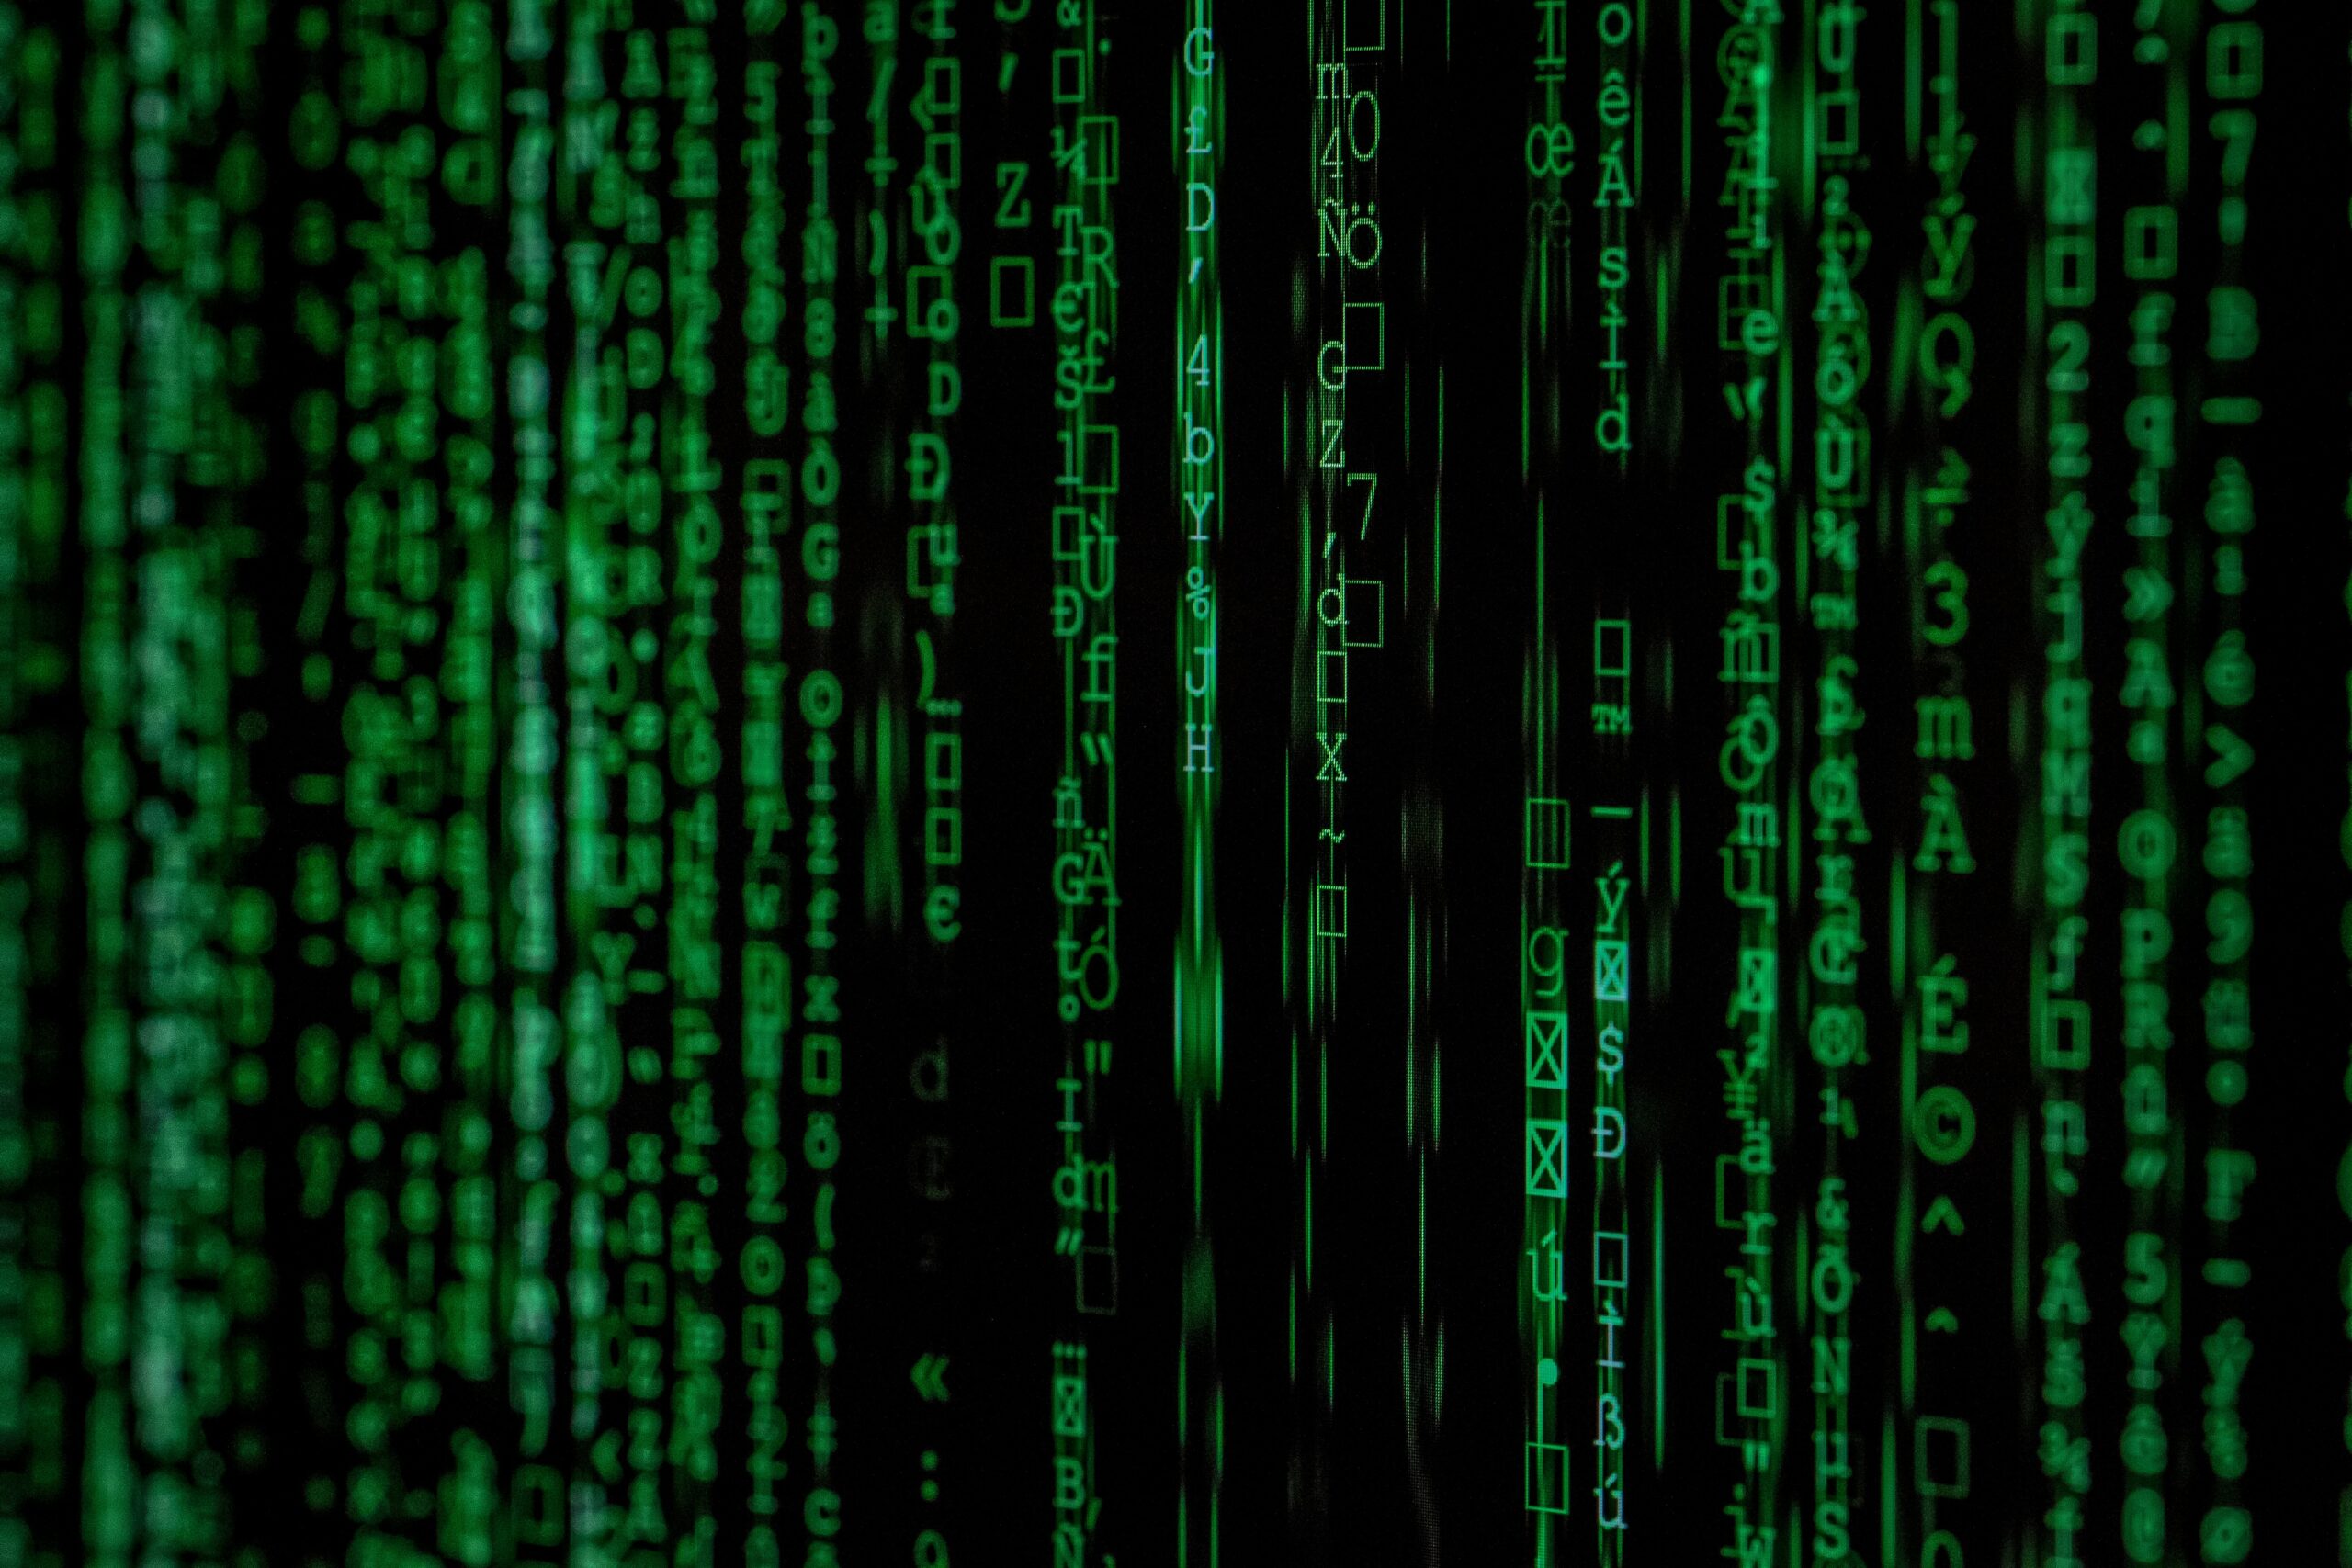 A close up of a green matrix code displaying encrypted cybersecurity questions for a CISO.